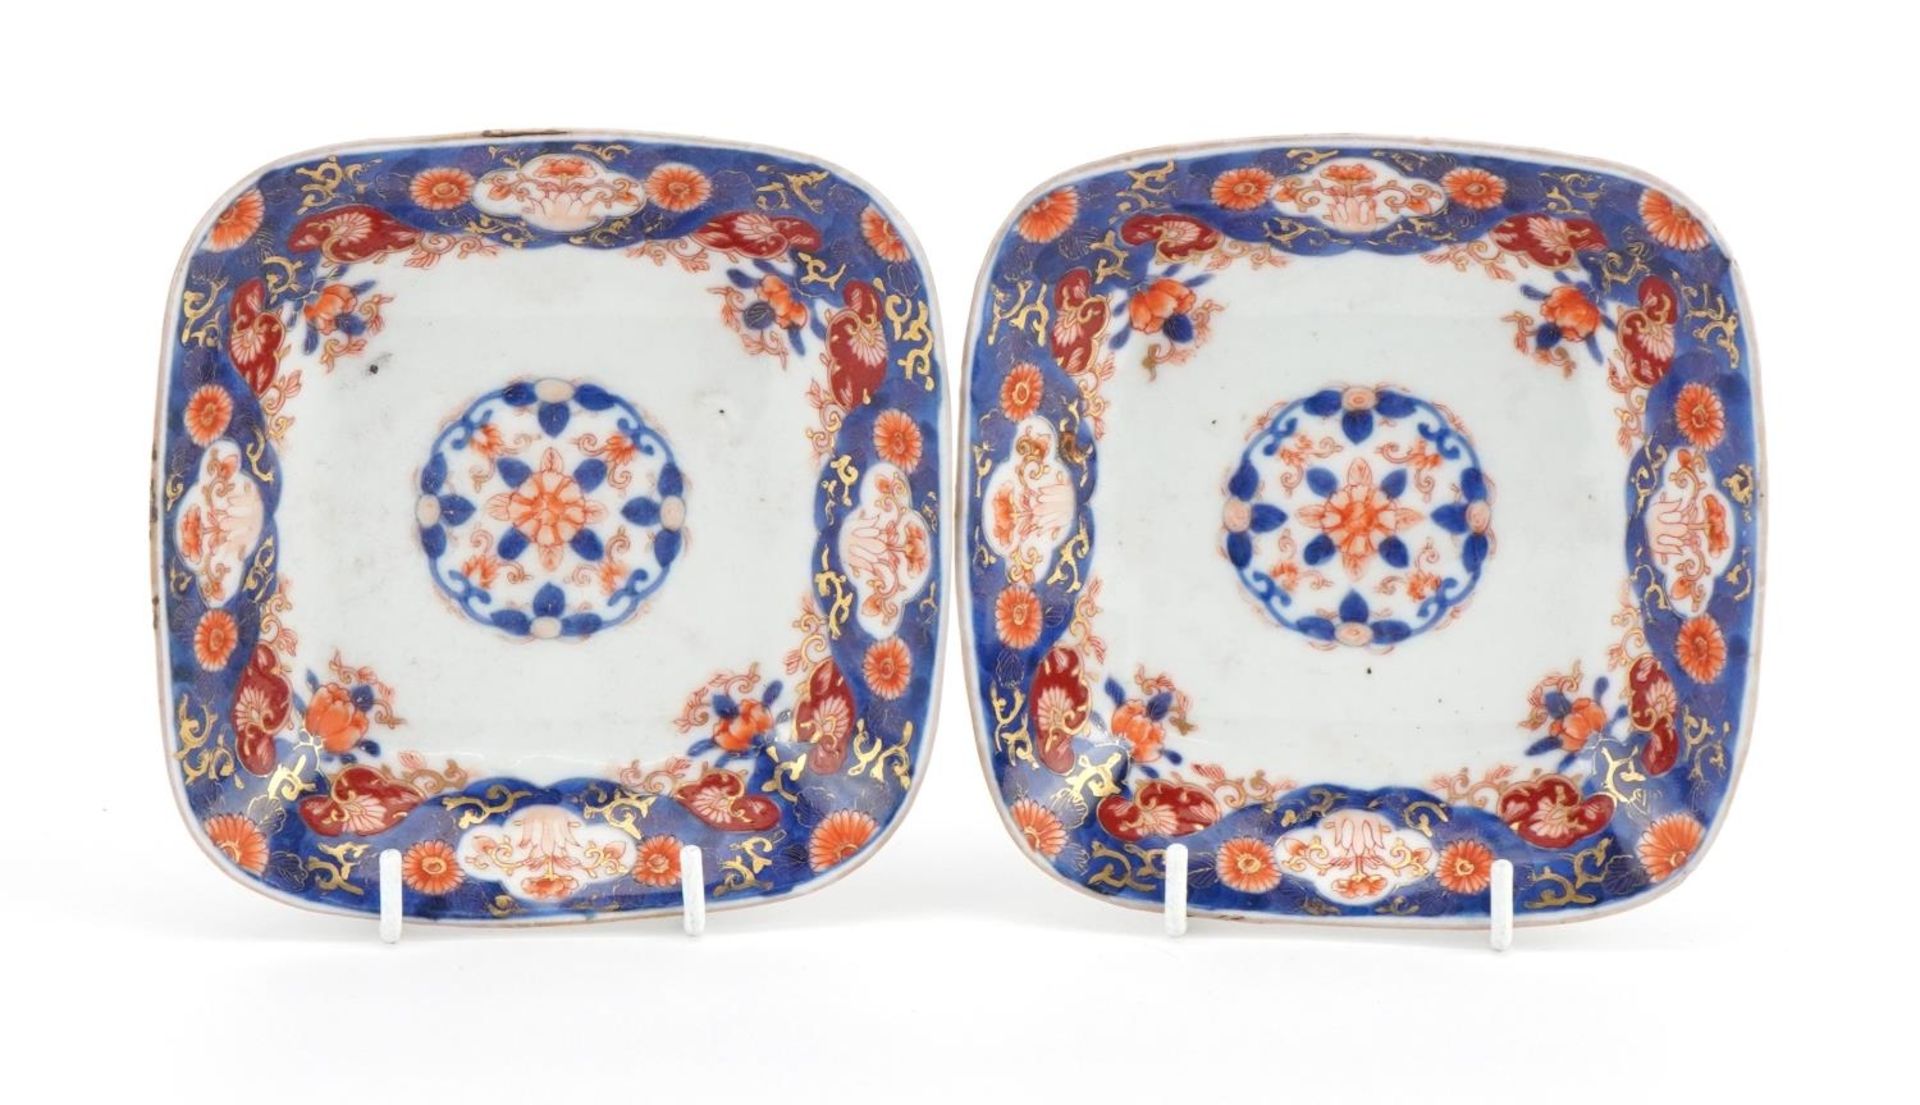 Pair of Japanese Koranasha porcelain dishes hand painted with flowers, each 12.5cm x 12.5cm